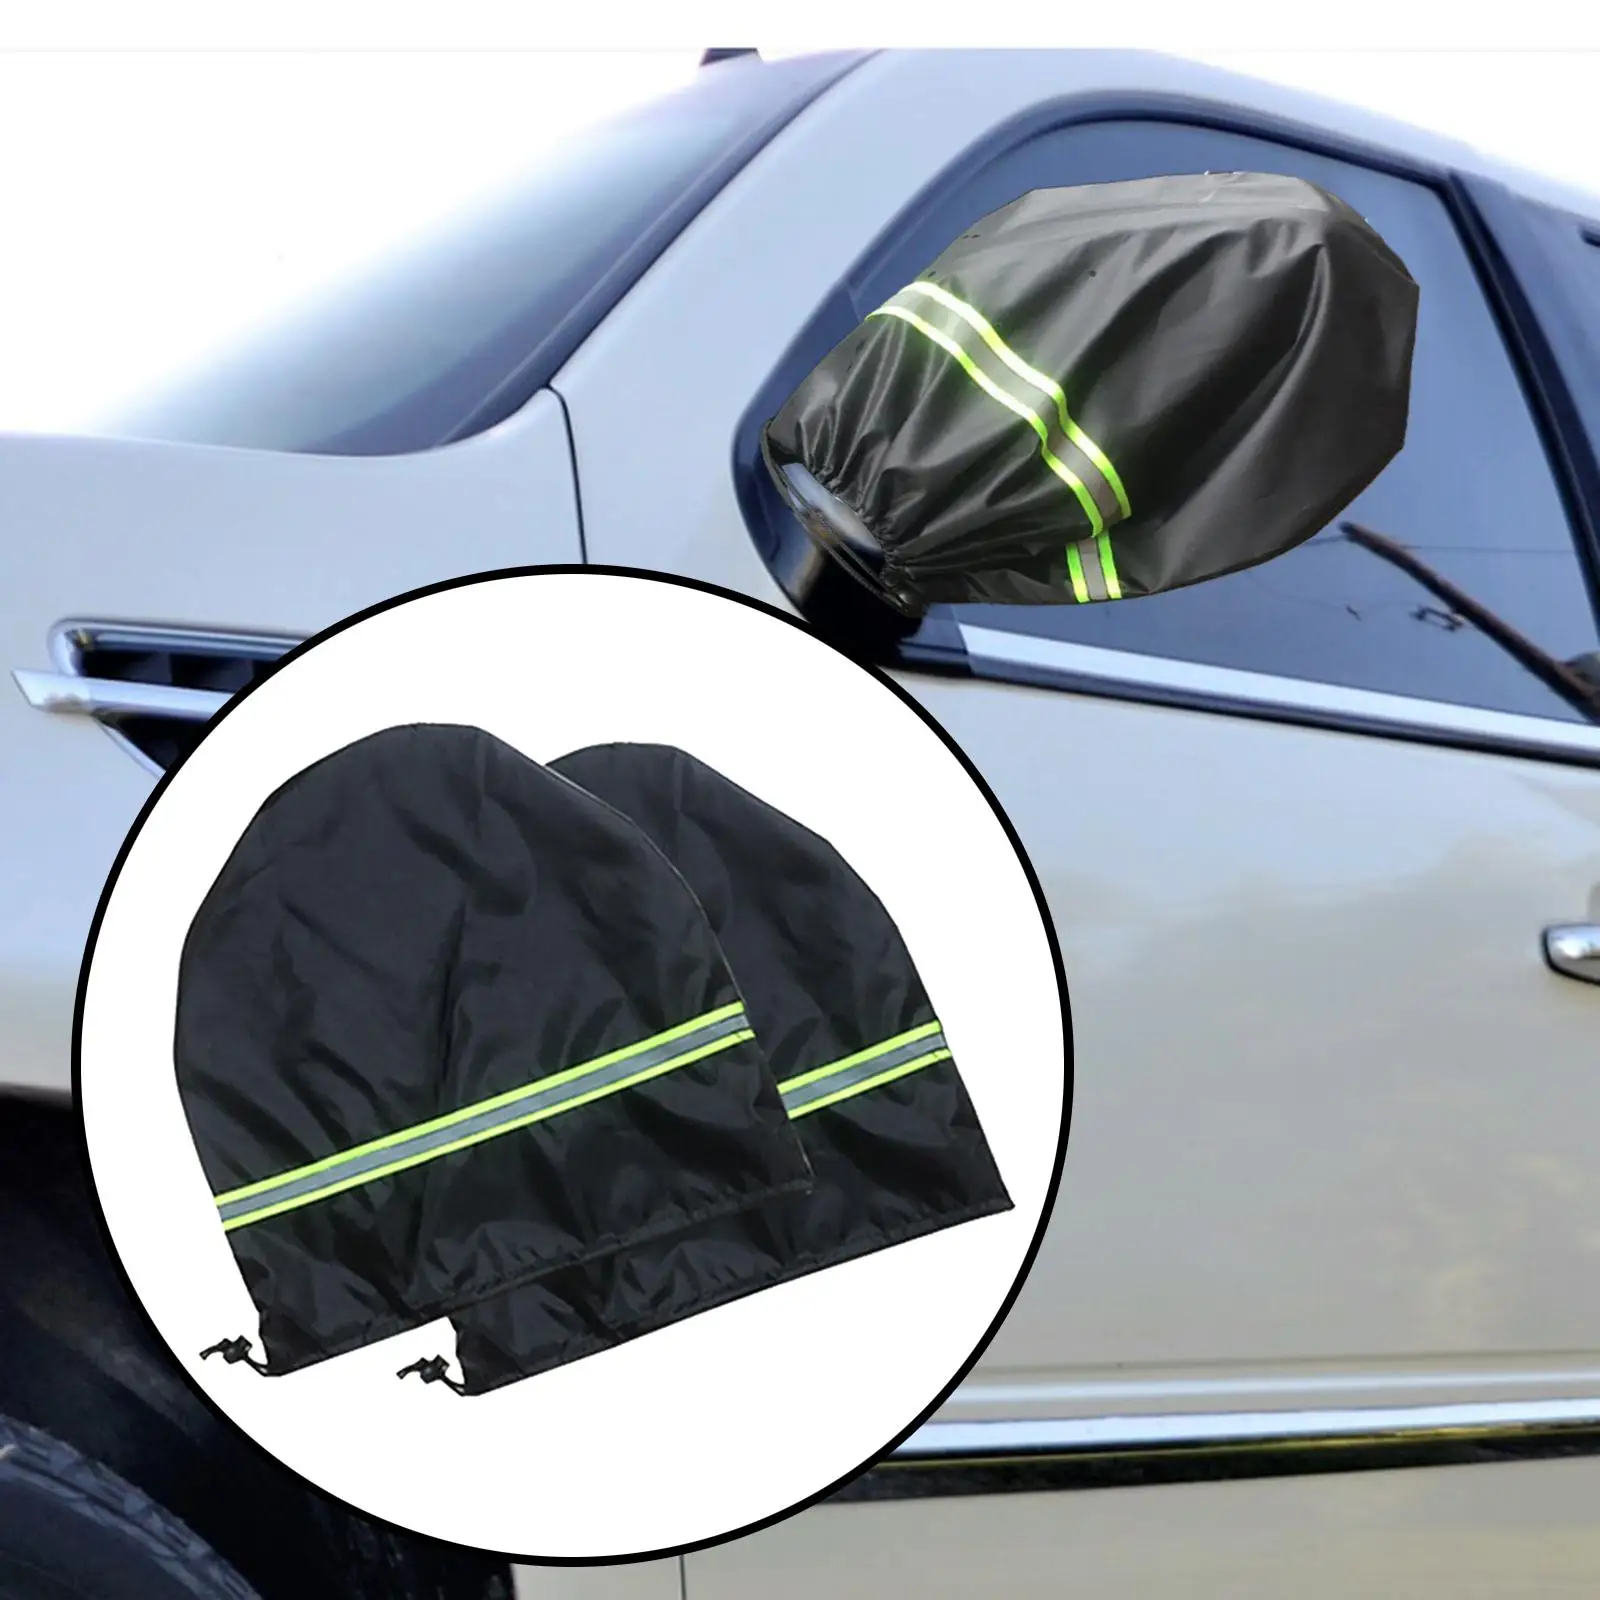 Car Rearview Mirror Cover Snow and Rain Cover Size 30x31cm Easily Install